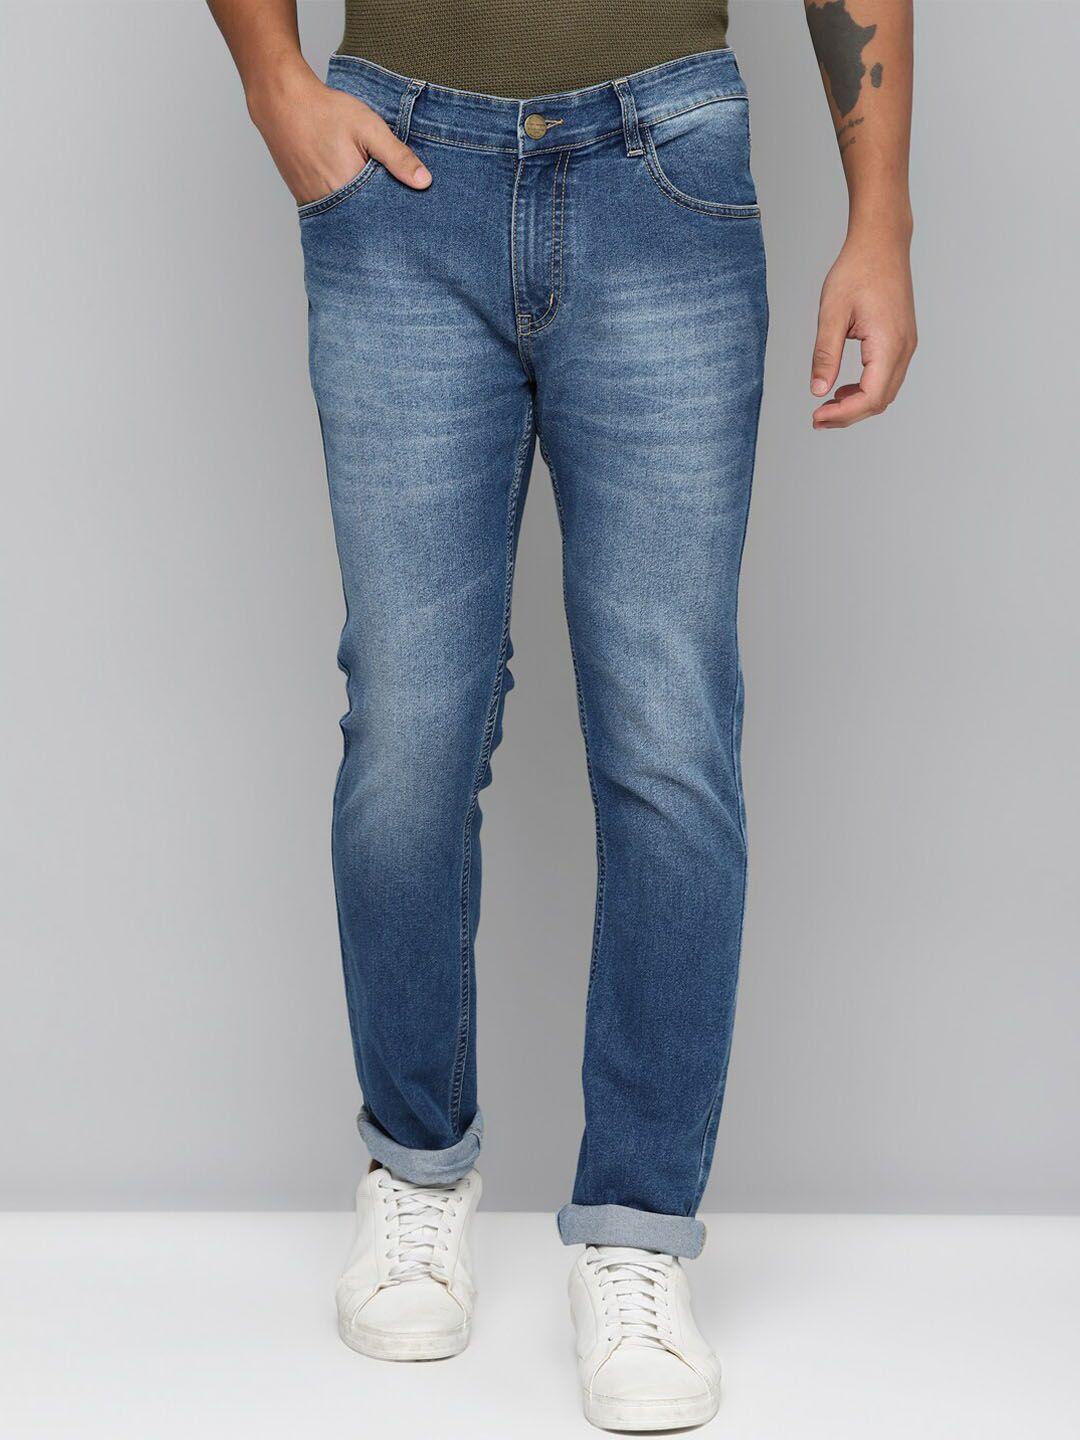 allen-cooper-men-relaxed-comfort-heavy-fade-clean-look-stretchable-jeans